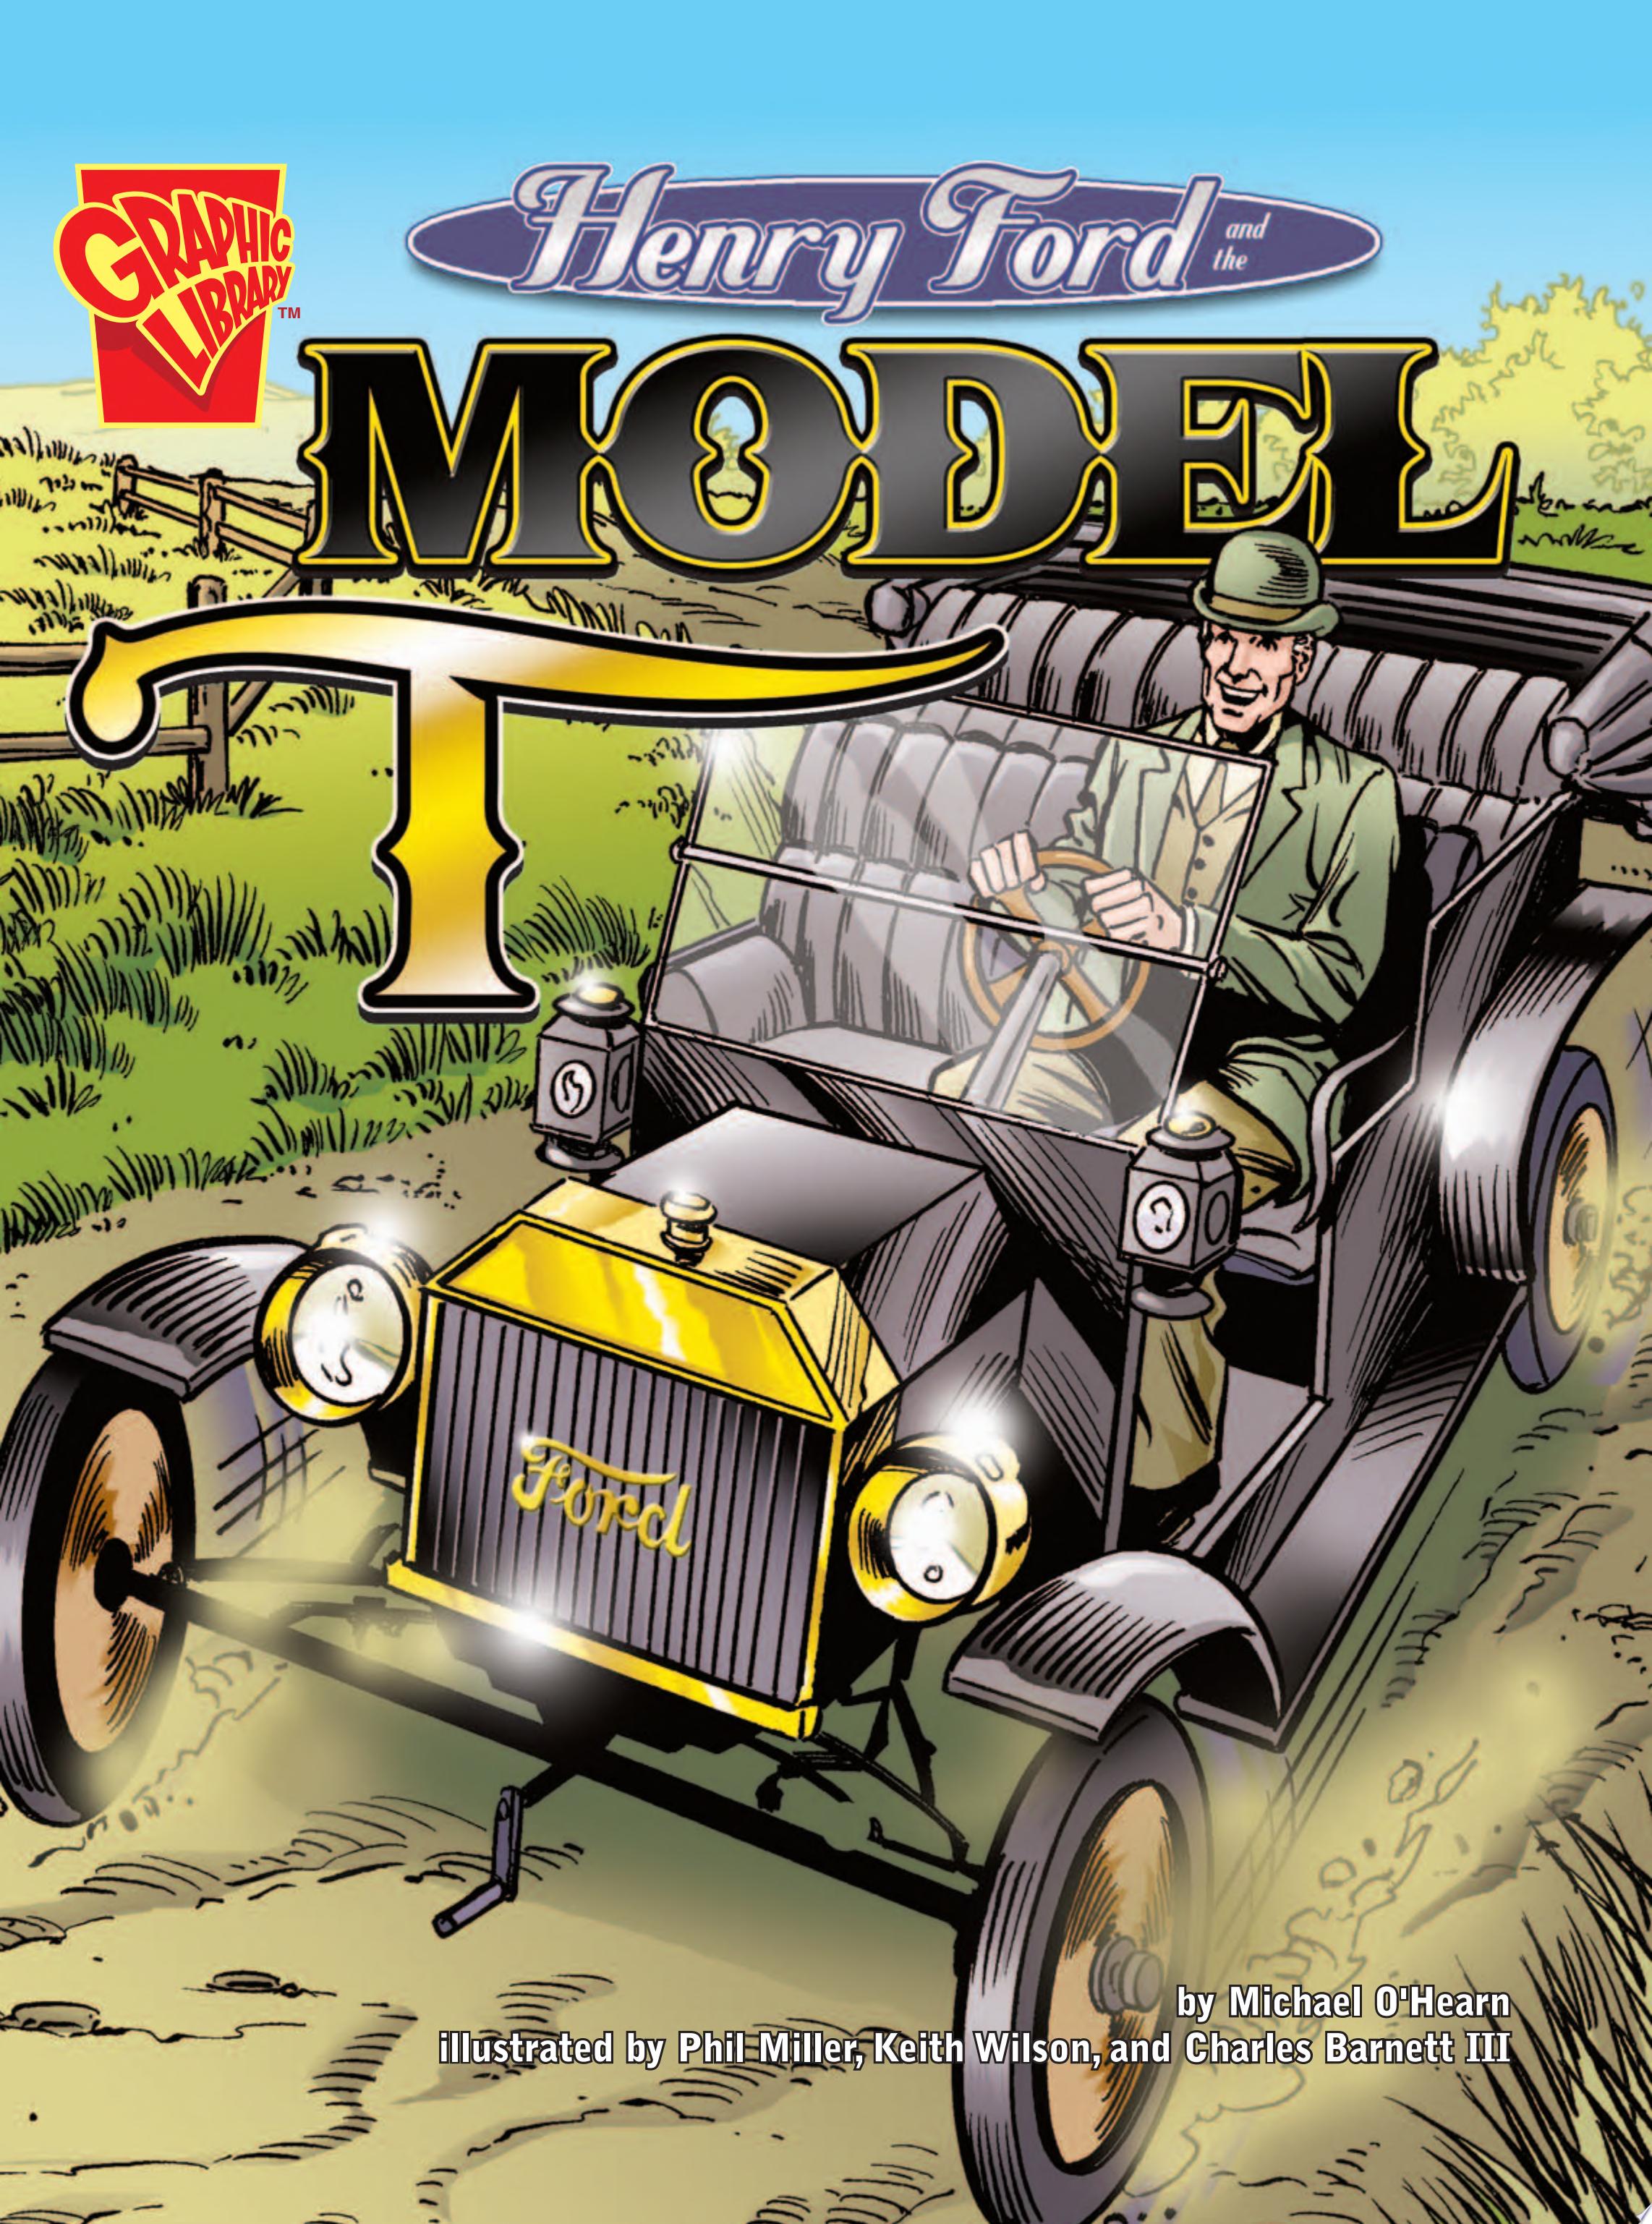 Image for "Henry Ford and the Model T"